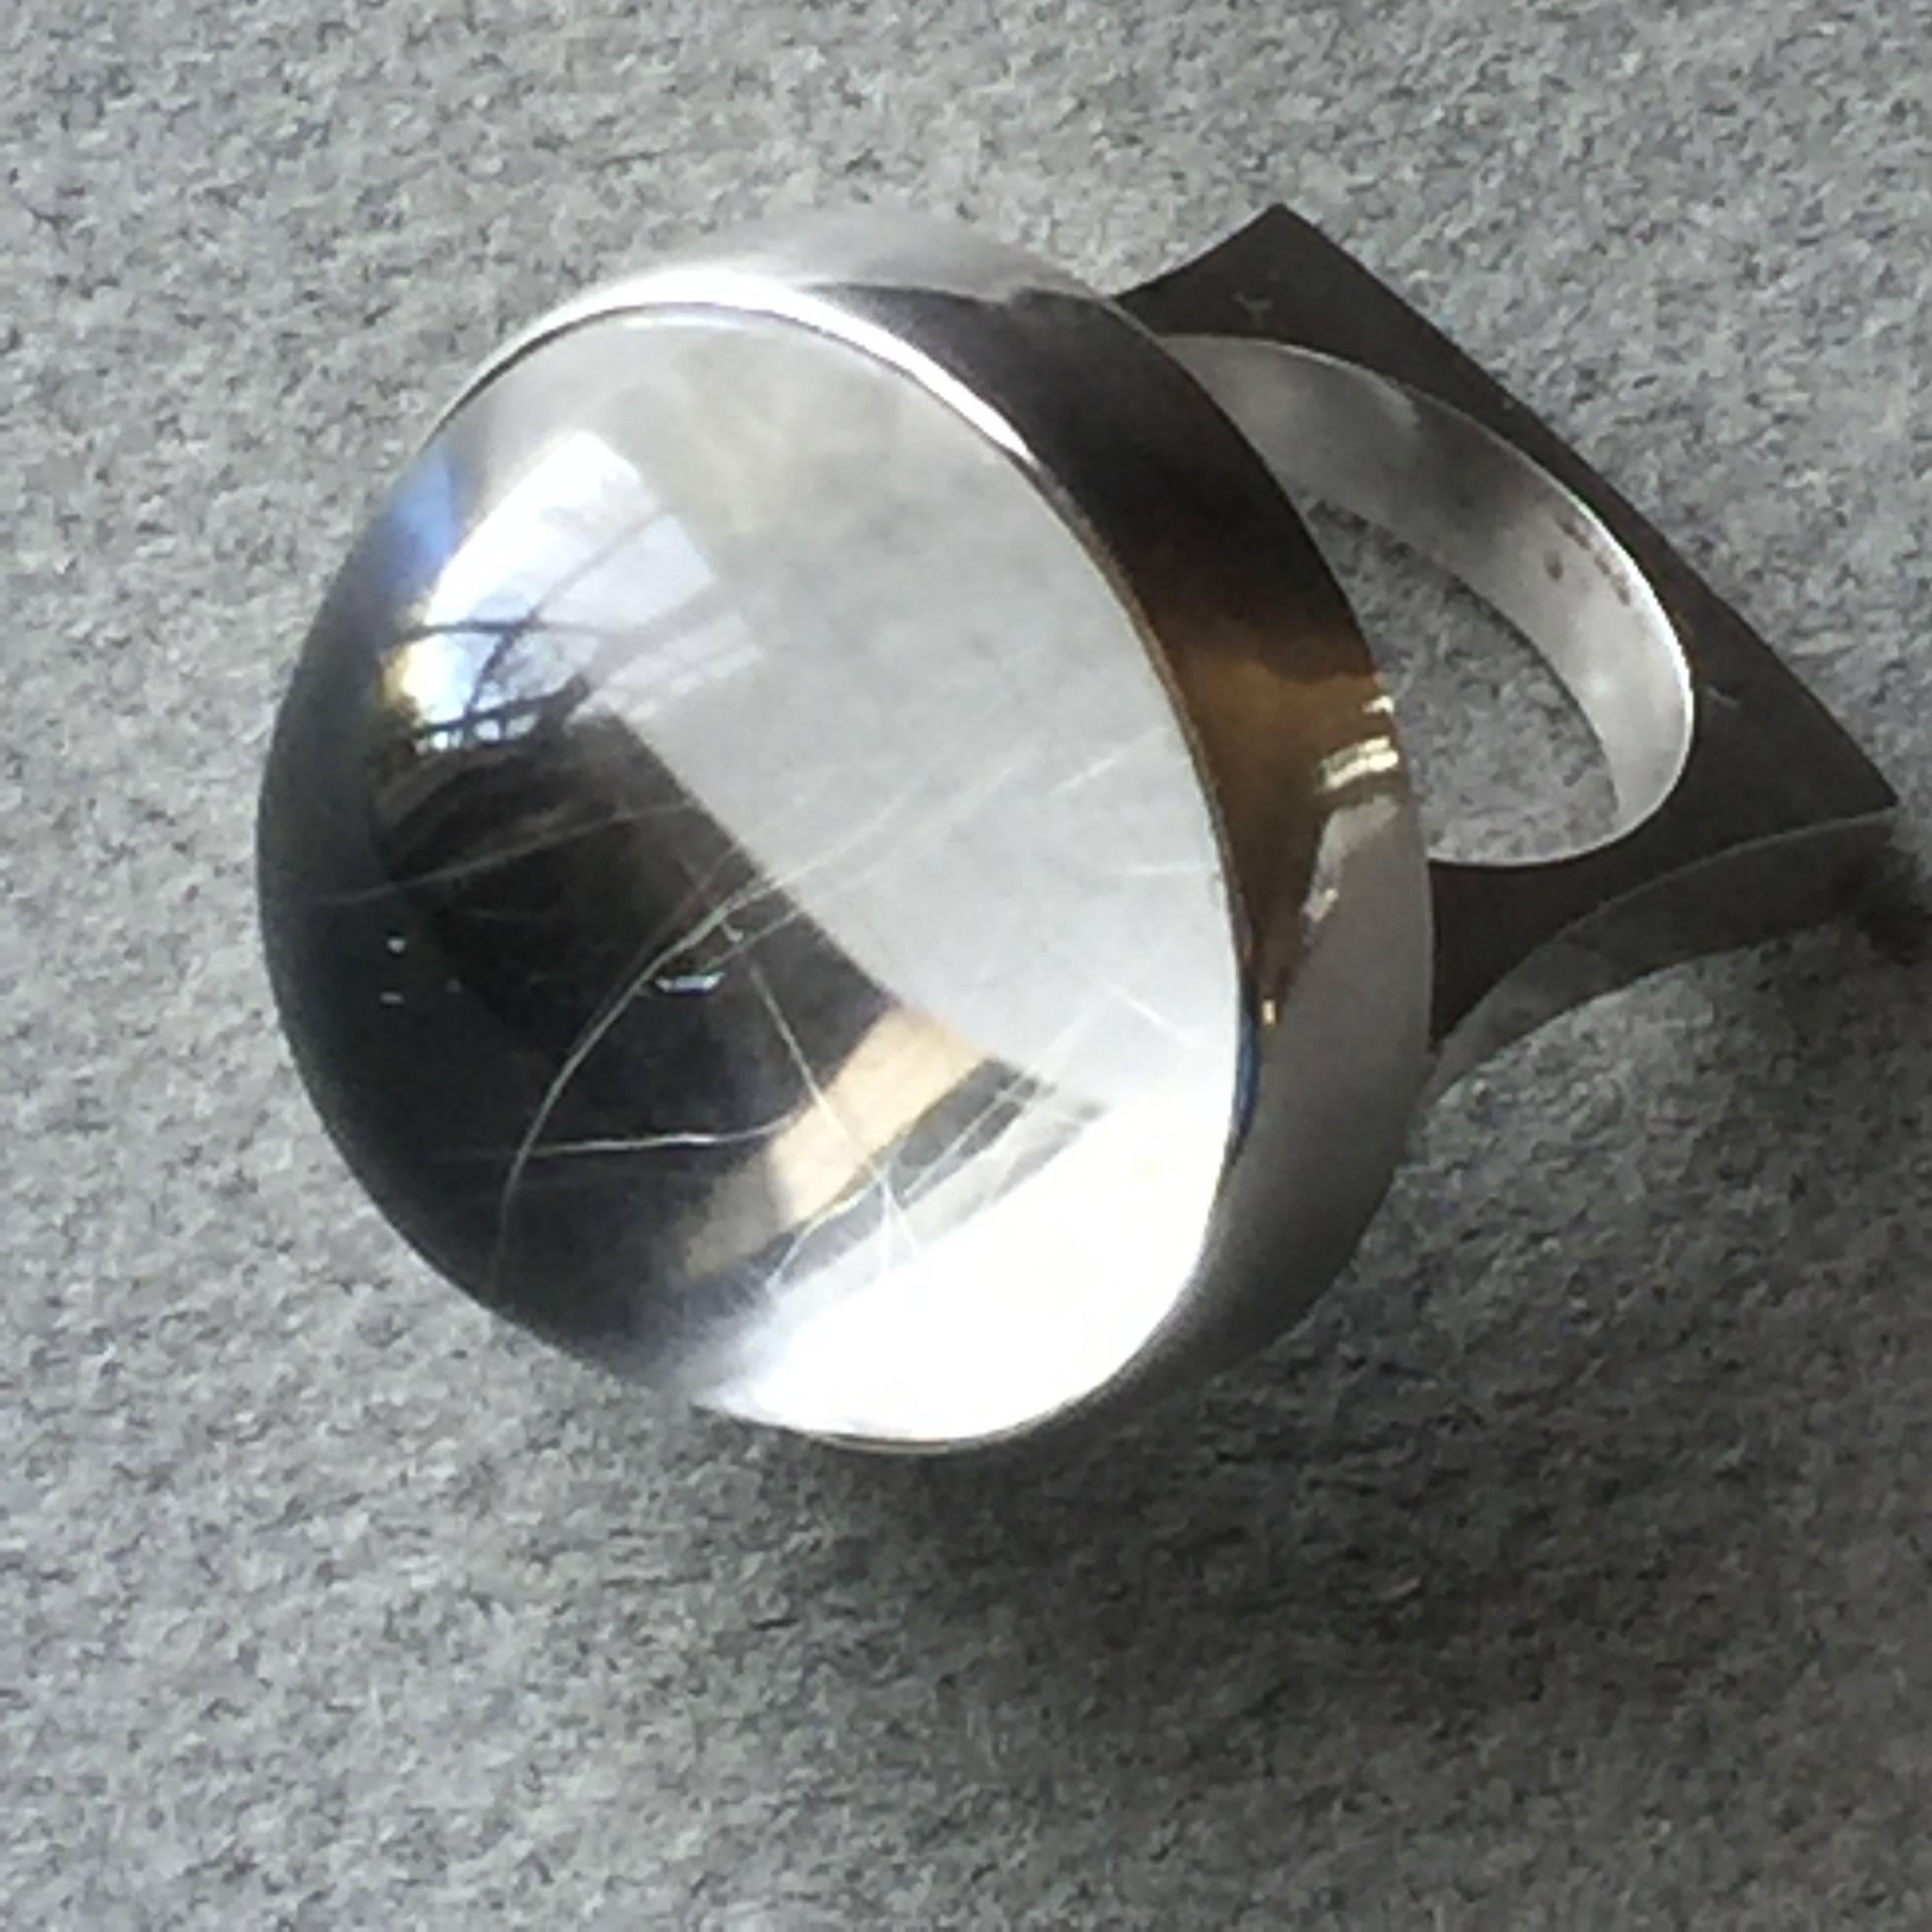 Georg Jensen Sterling Silver Ring No. 169 with rutilated quartz cabochon with butterfly inclusions by Bent Gabrielsen. Sleek bold modernist design with gem quality rutilated quartz and unique shank. Size 5.25